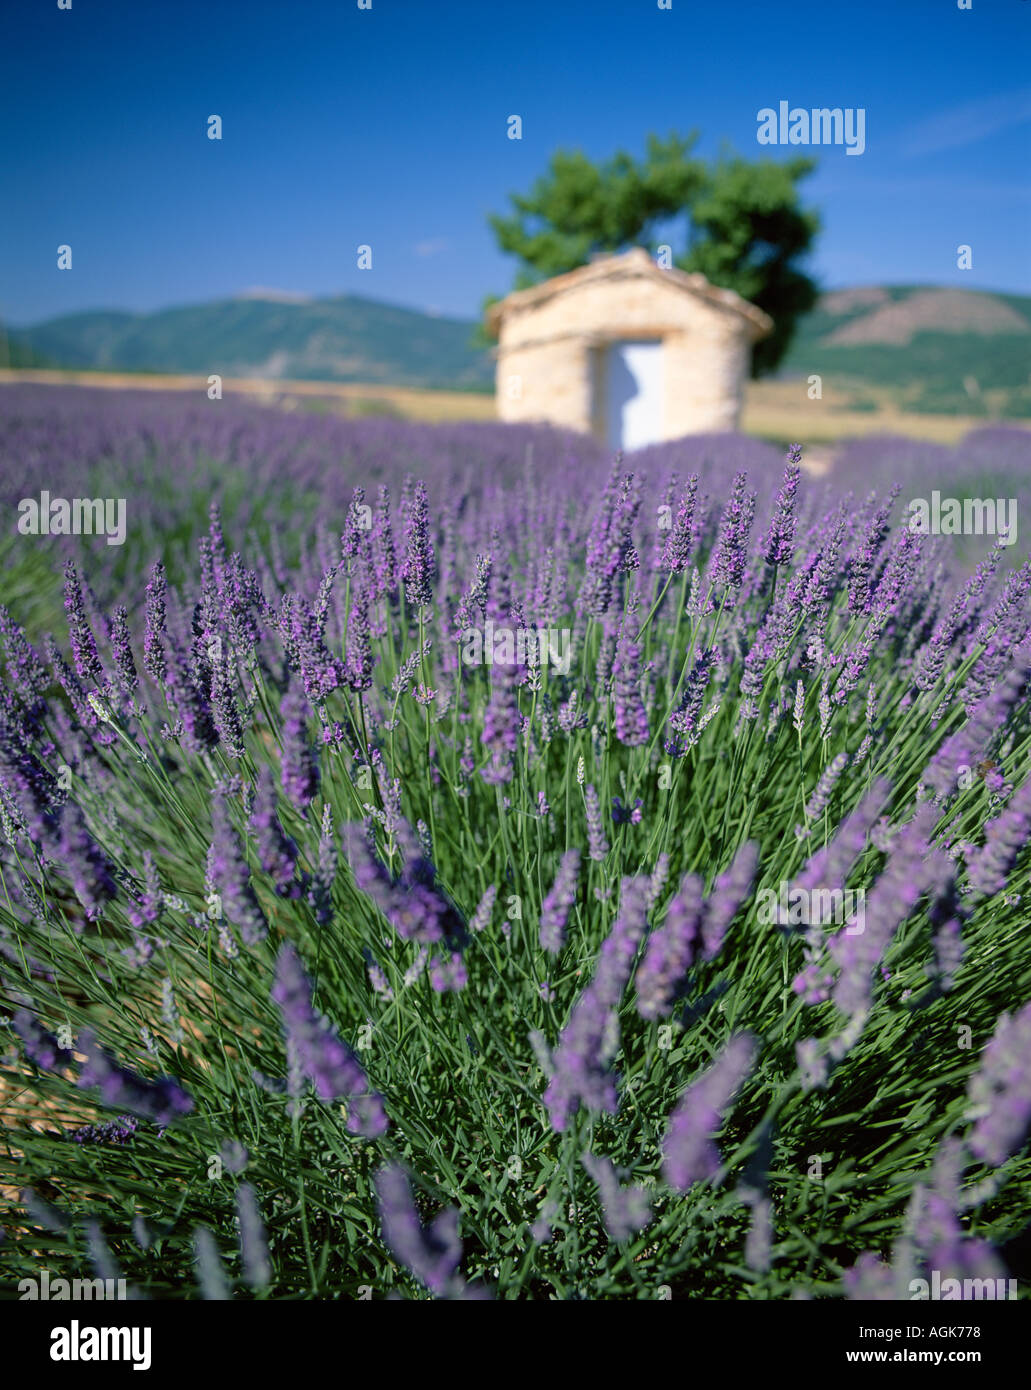 Stone hut in lavender field Provence France Stock Photo